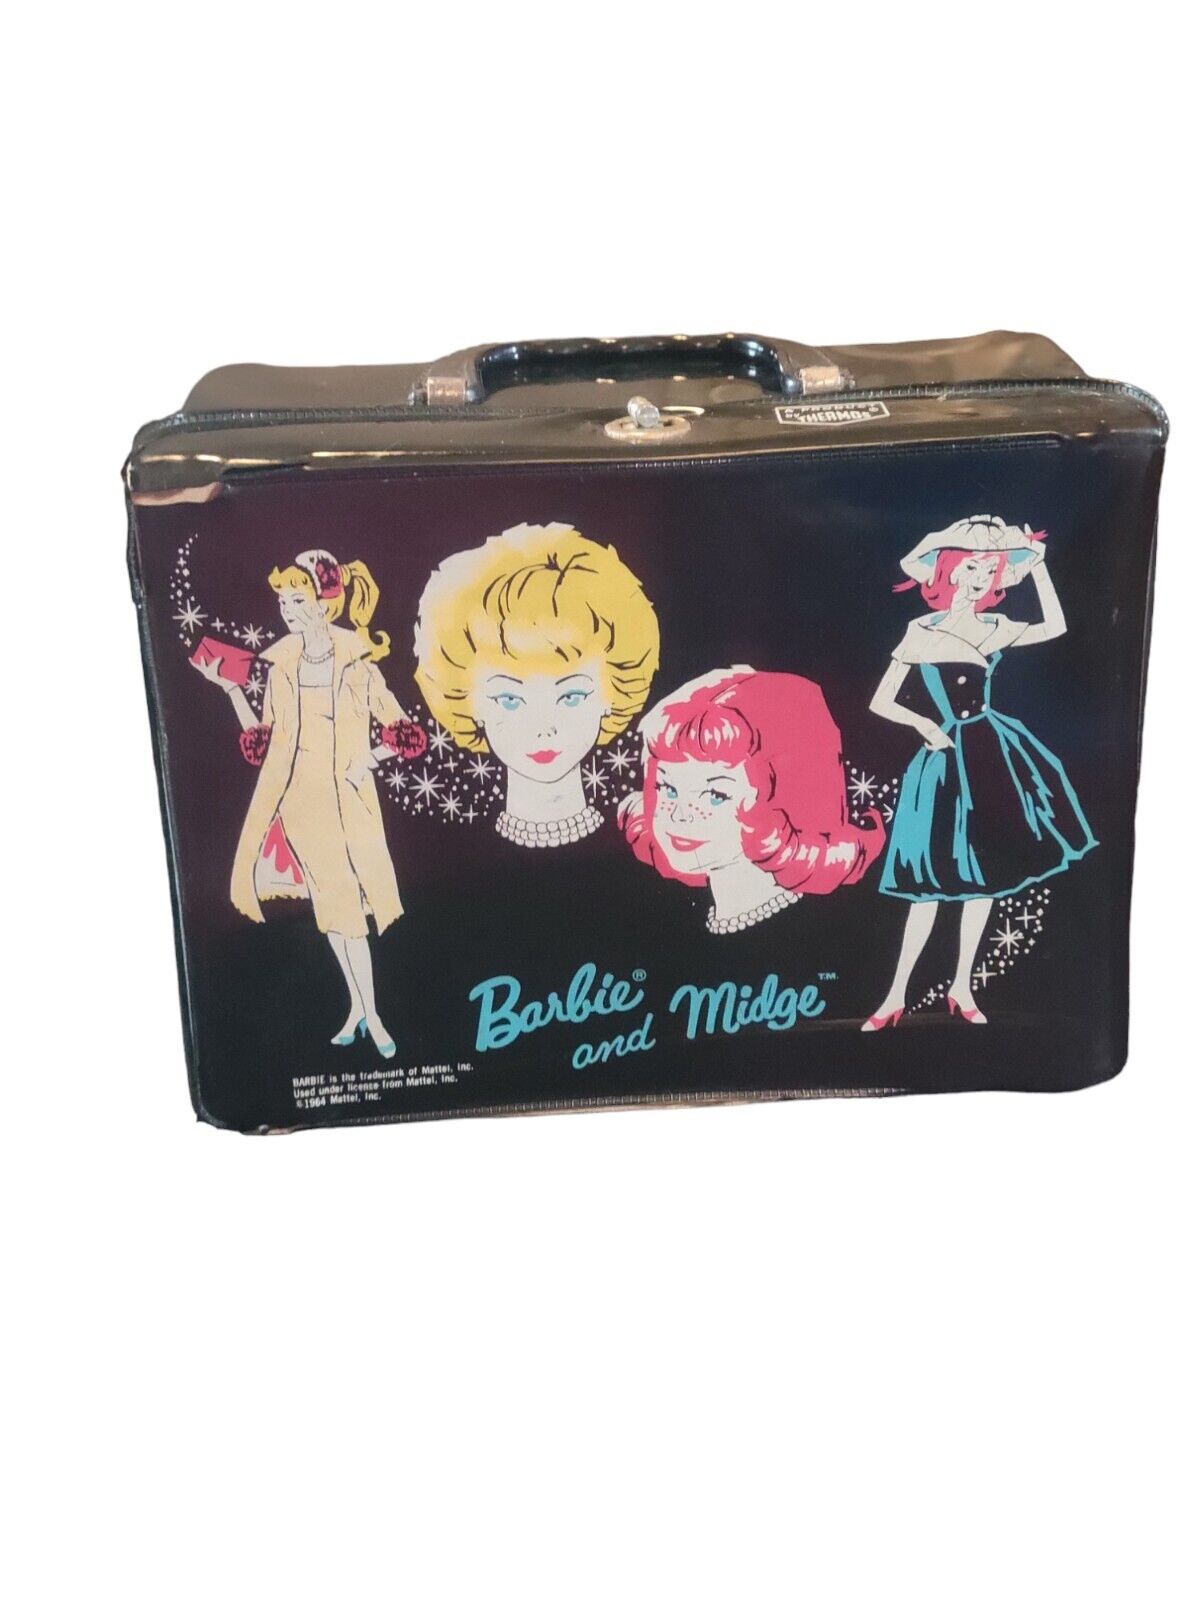 Barbie and Midge Vinyl Lunchbox 1964 Vintage Wear Noted See Pictures